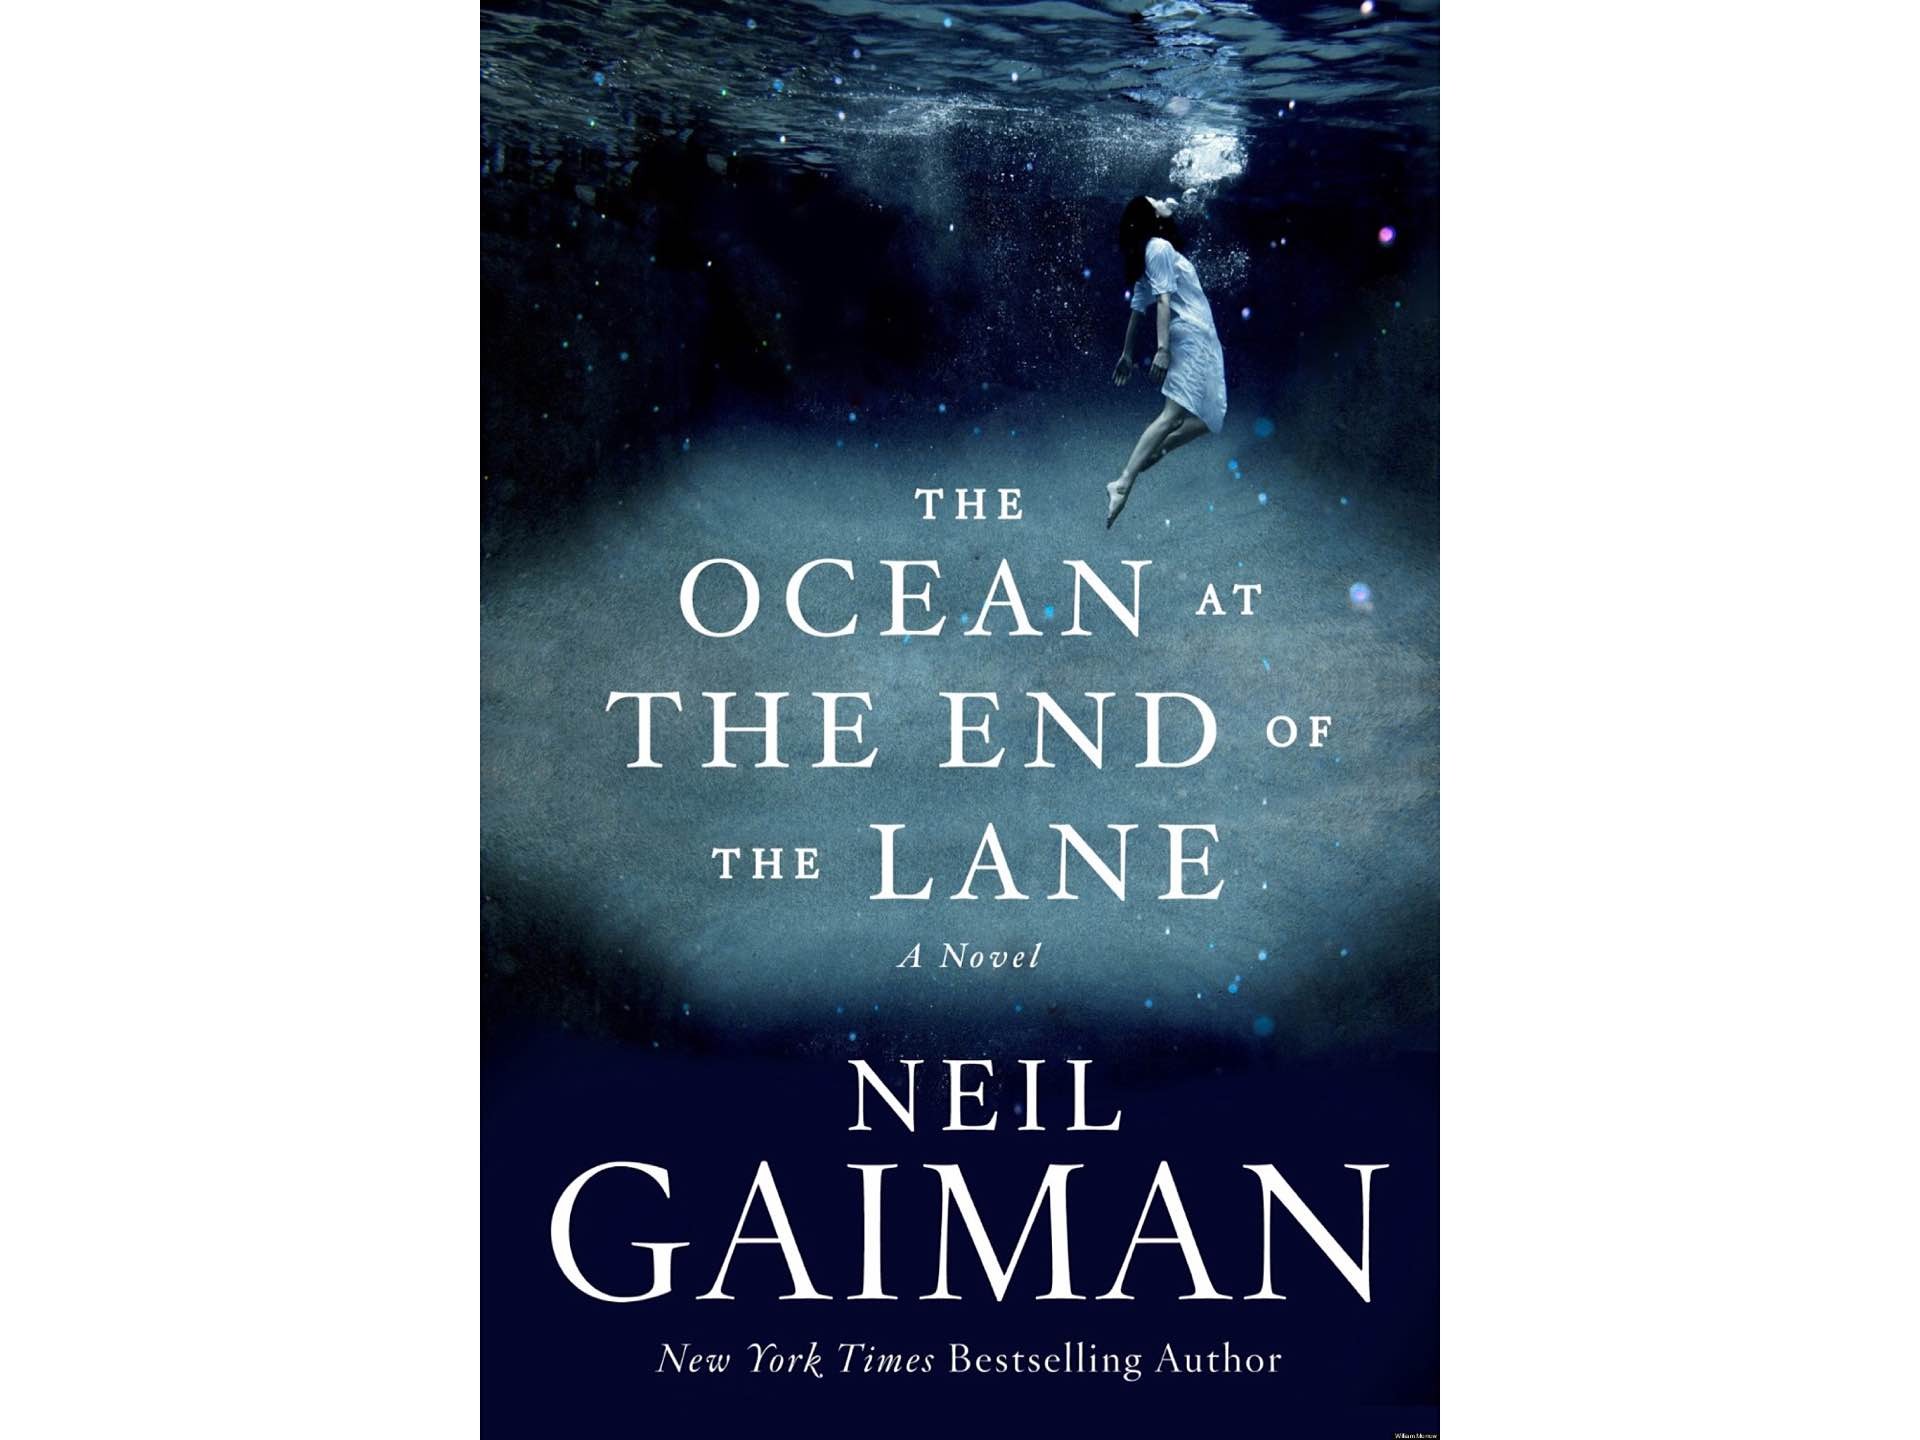 The Ocean at the End of the Lane by Neil Gaiman.